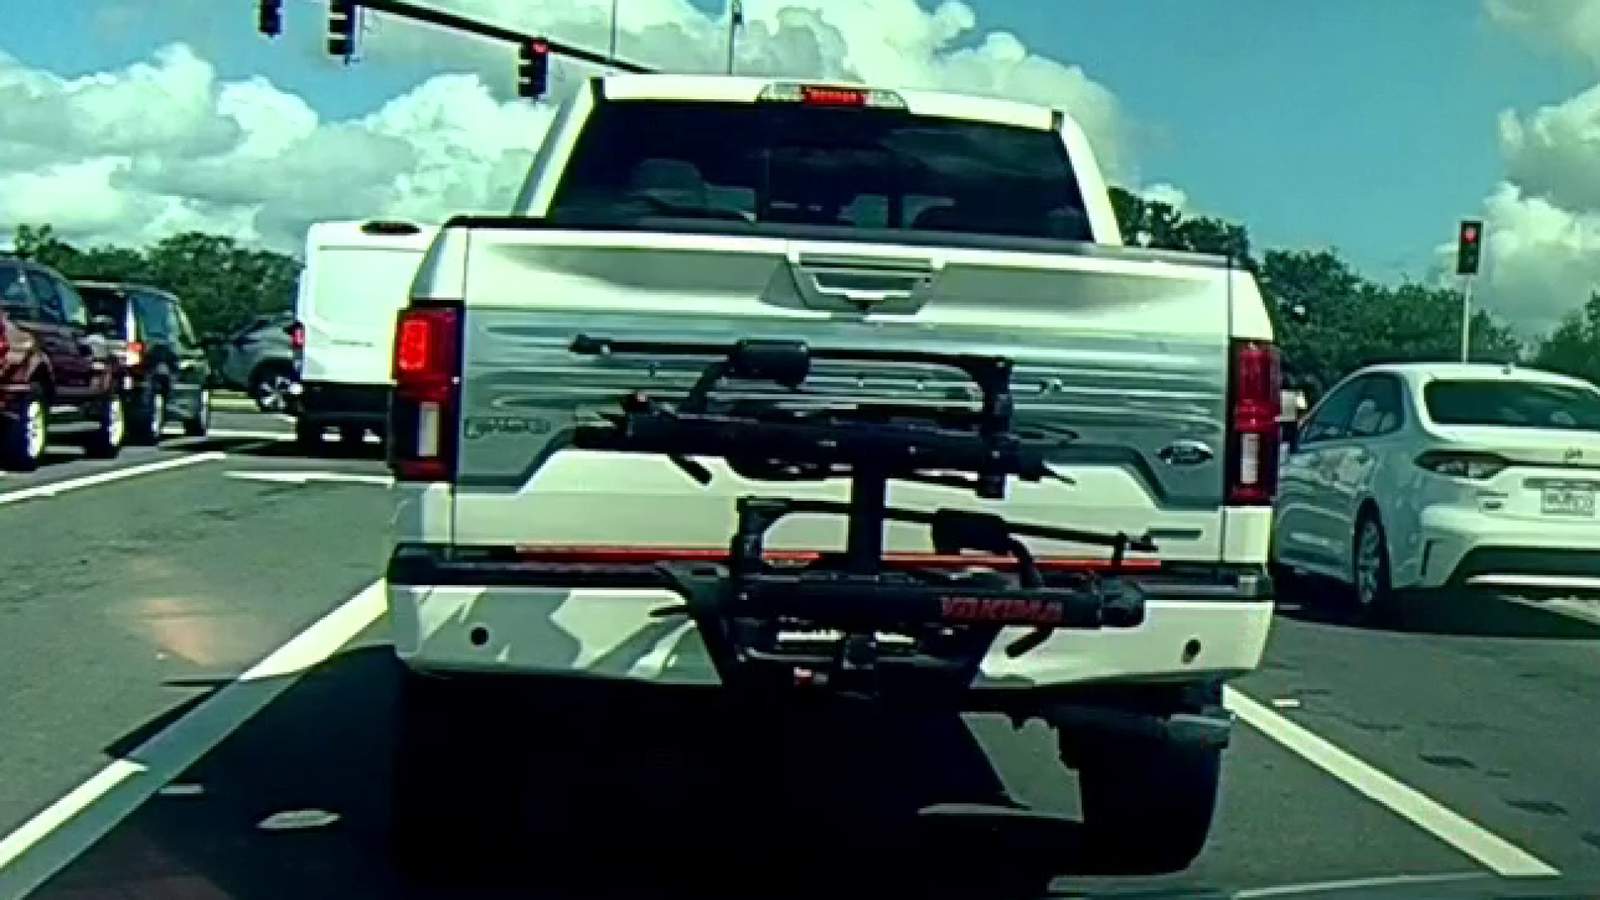 Ask Trooper Steve: This is the proper way to install a bike rack